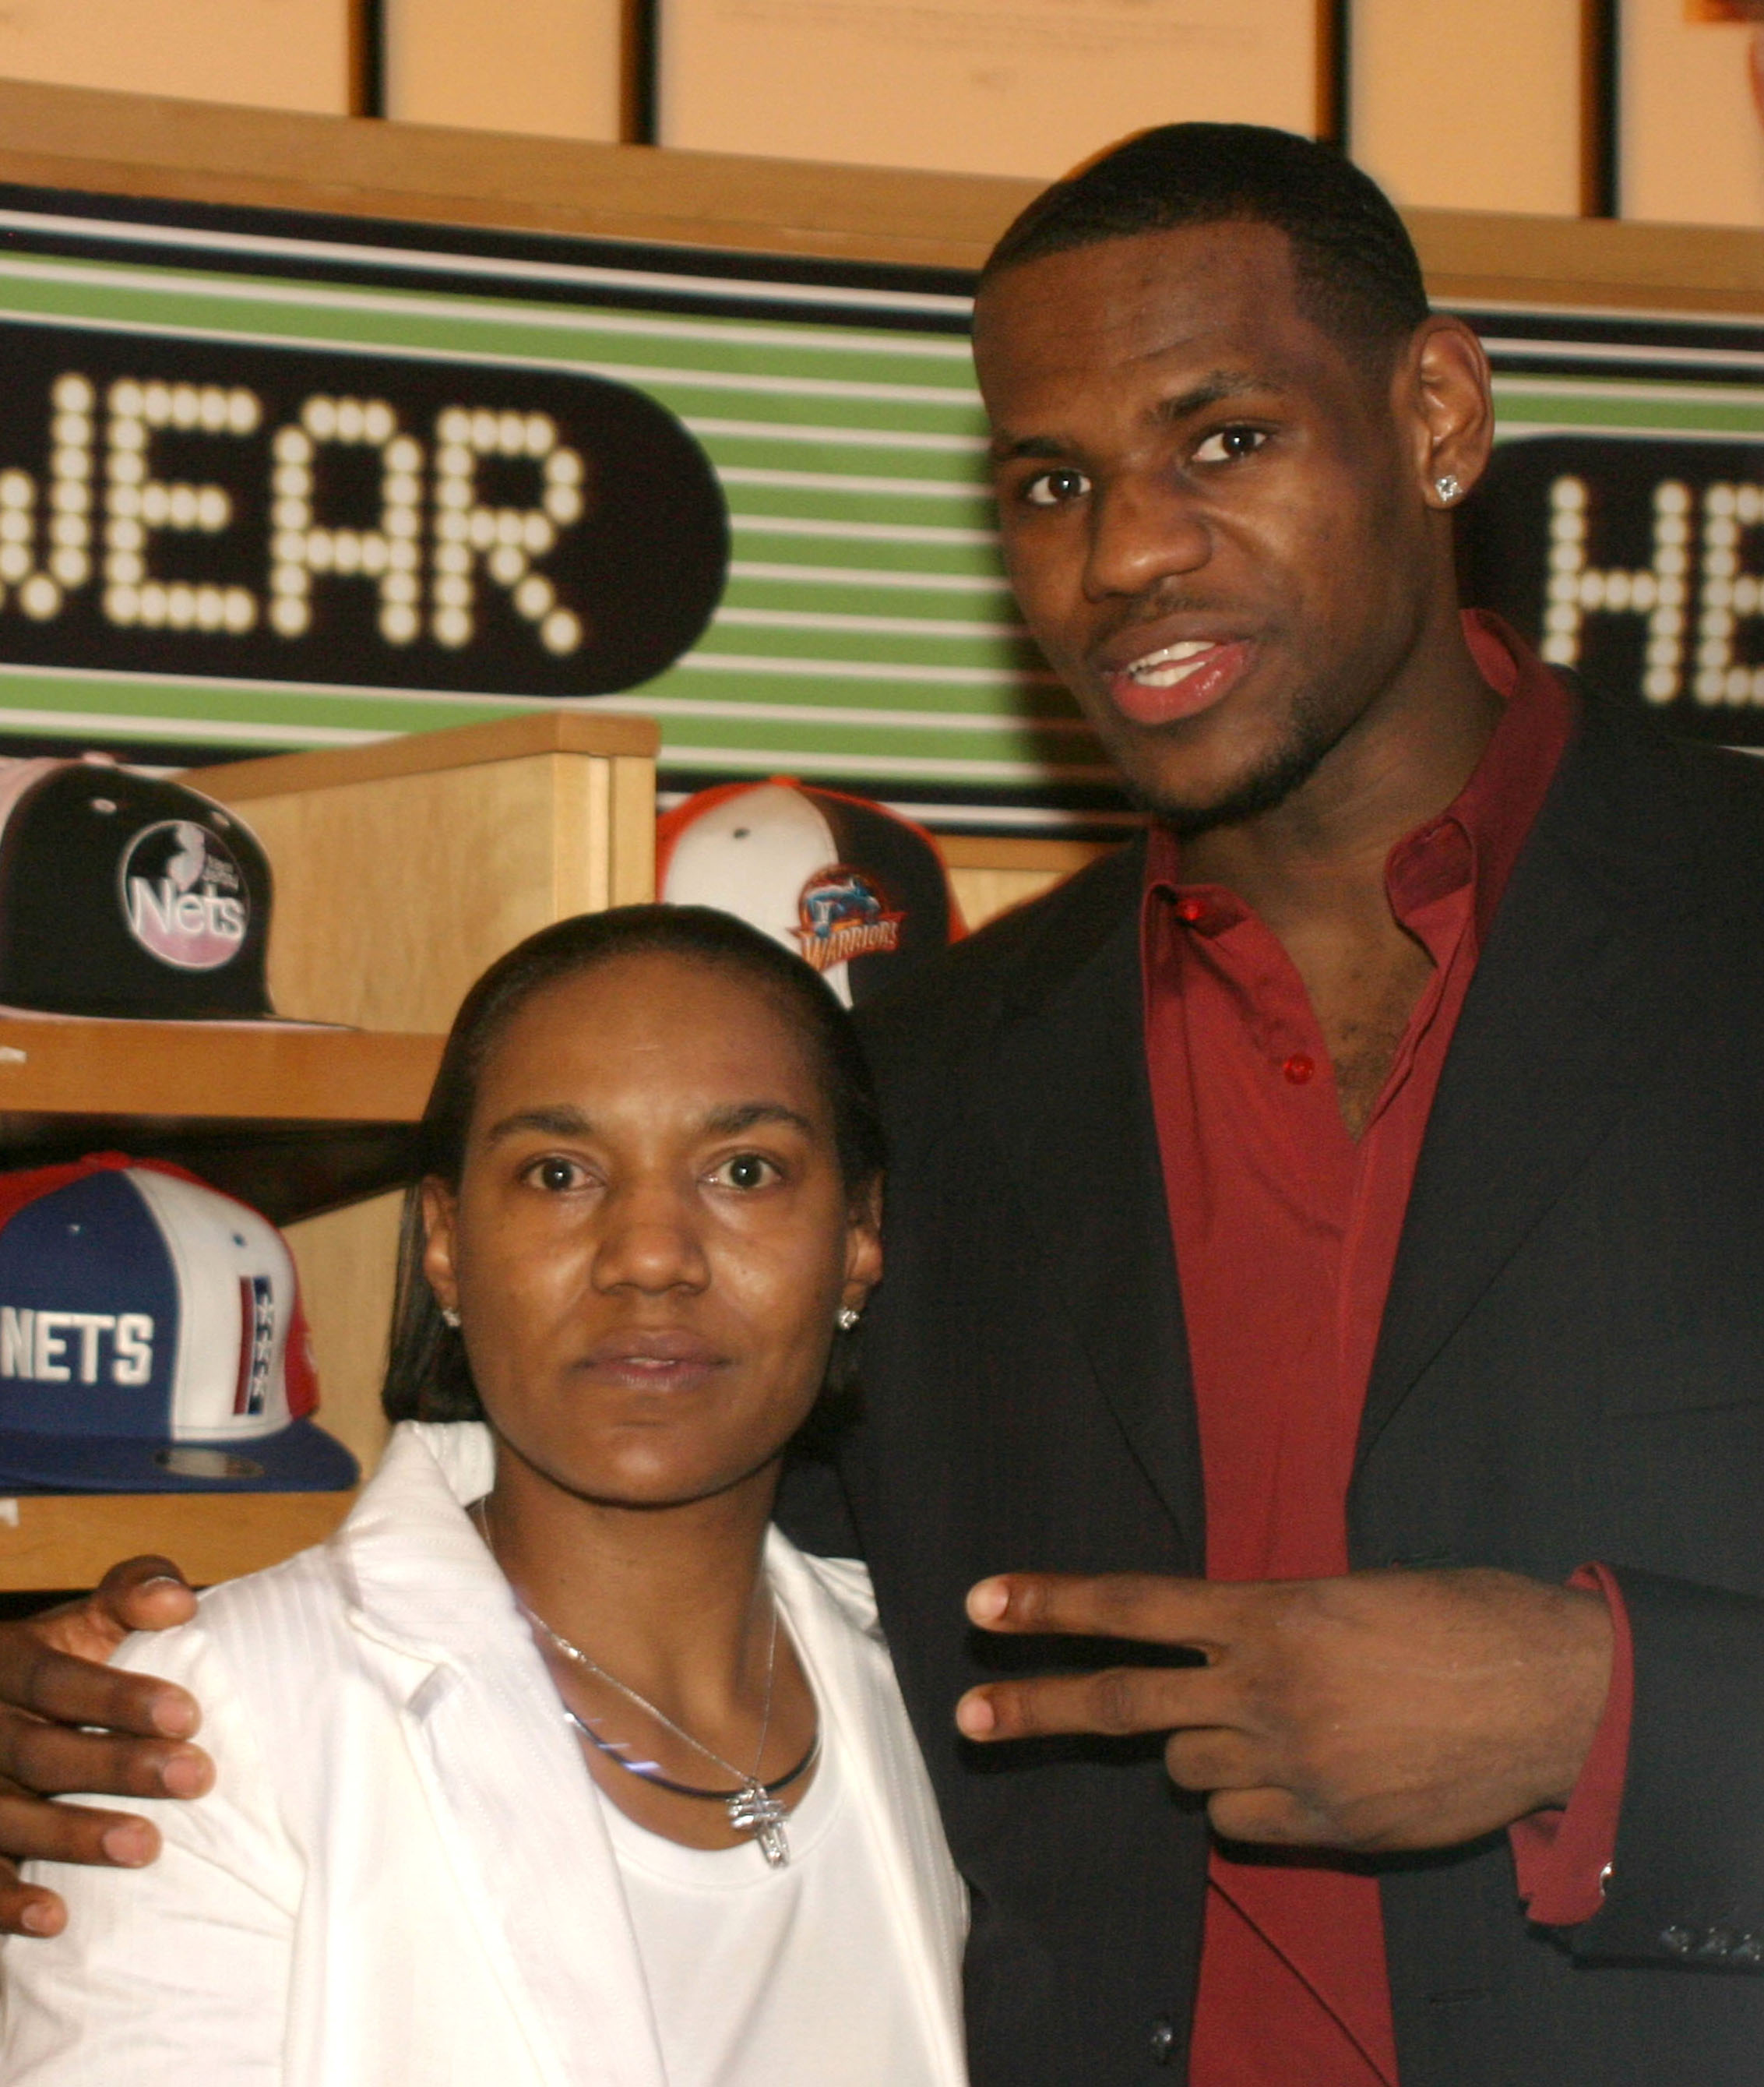 Lebron James and his mom Gloria during Got Milk? NBA Rookie Of The Year 2004 presented to LeBron James on April 20, 2004 in New York City | Source: Getty Images